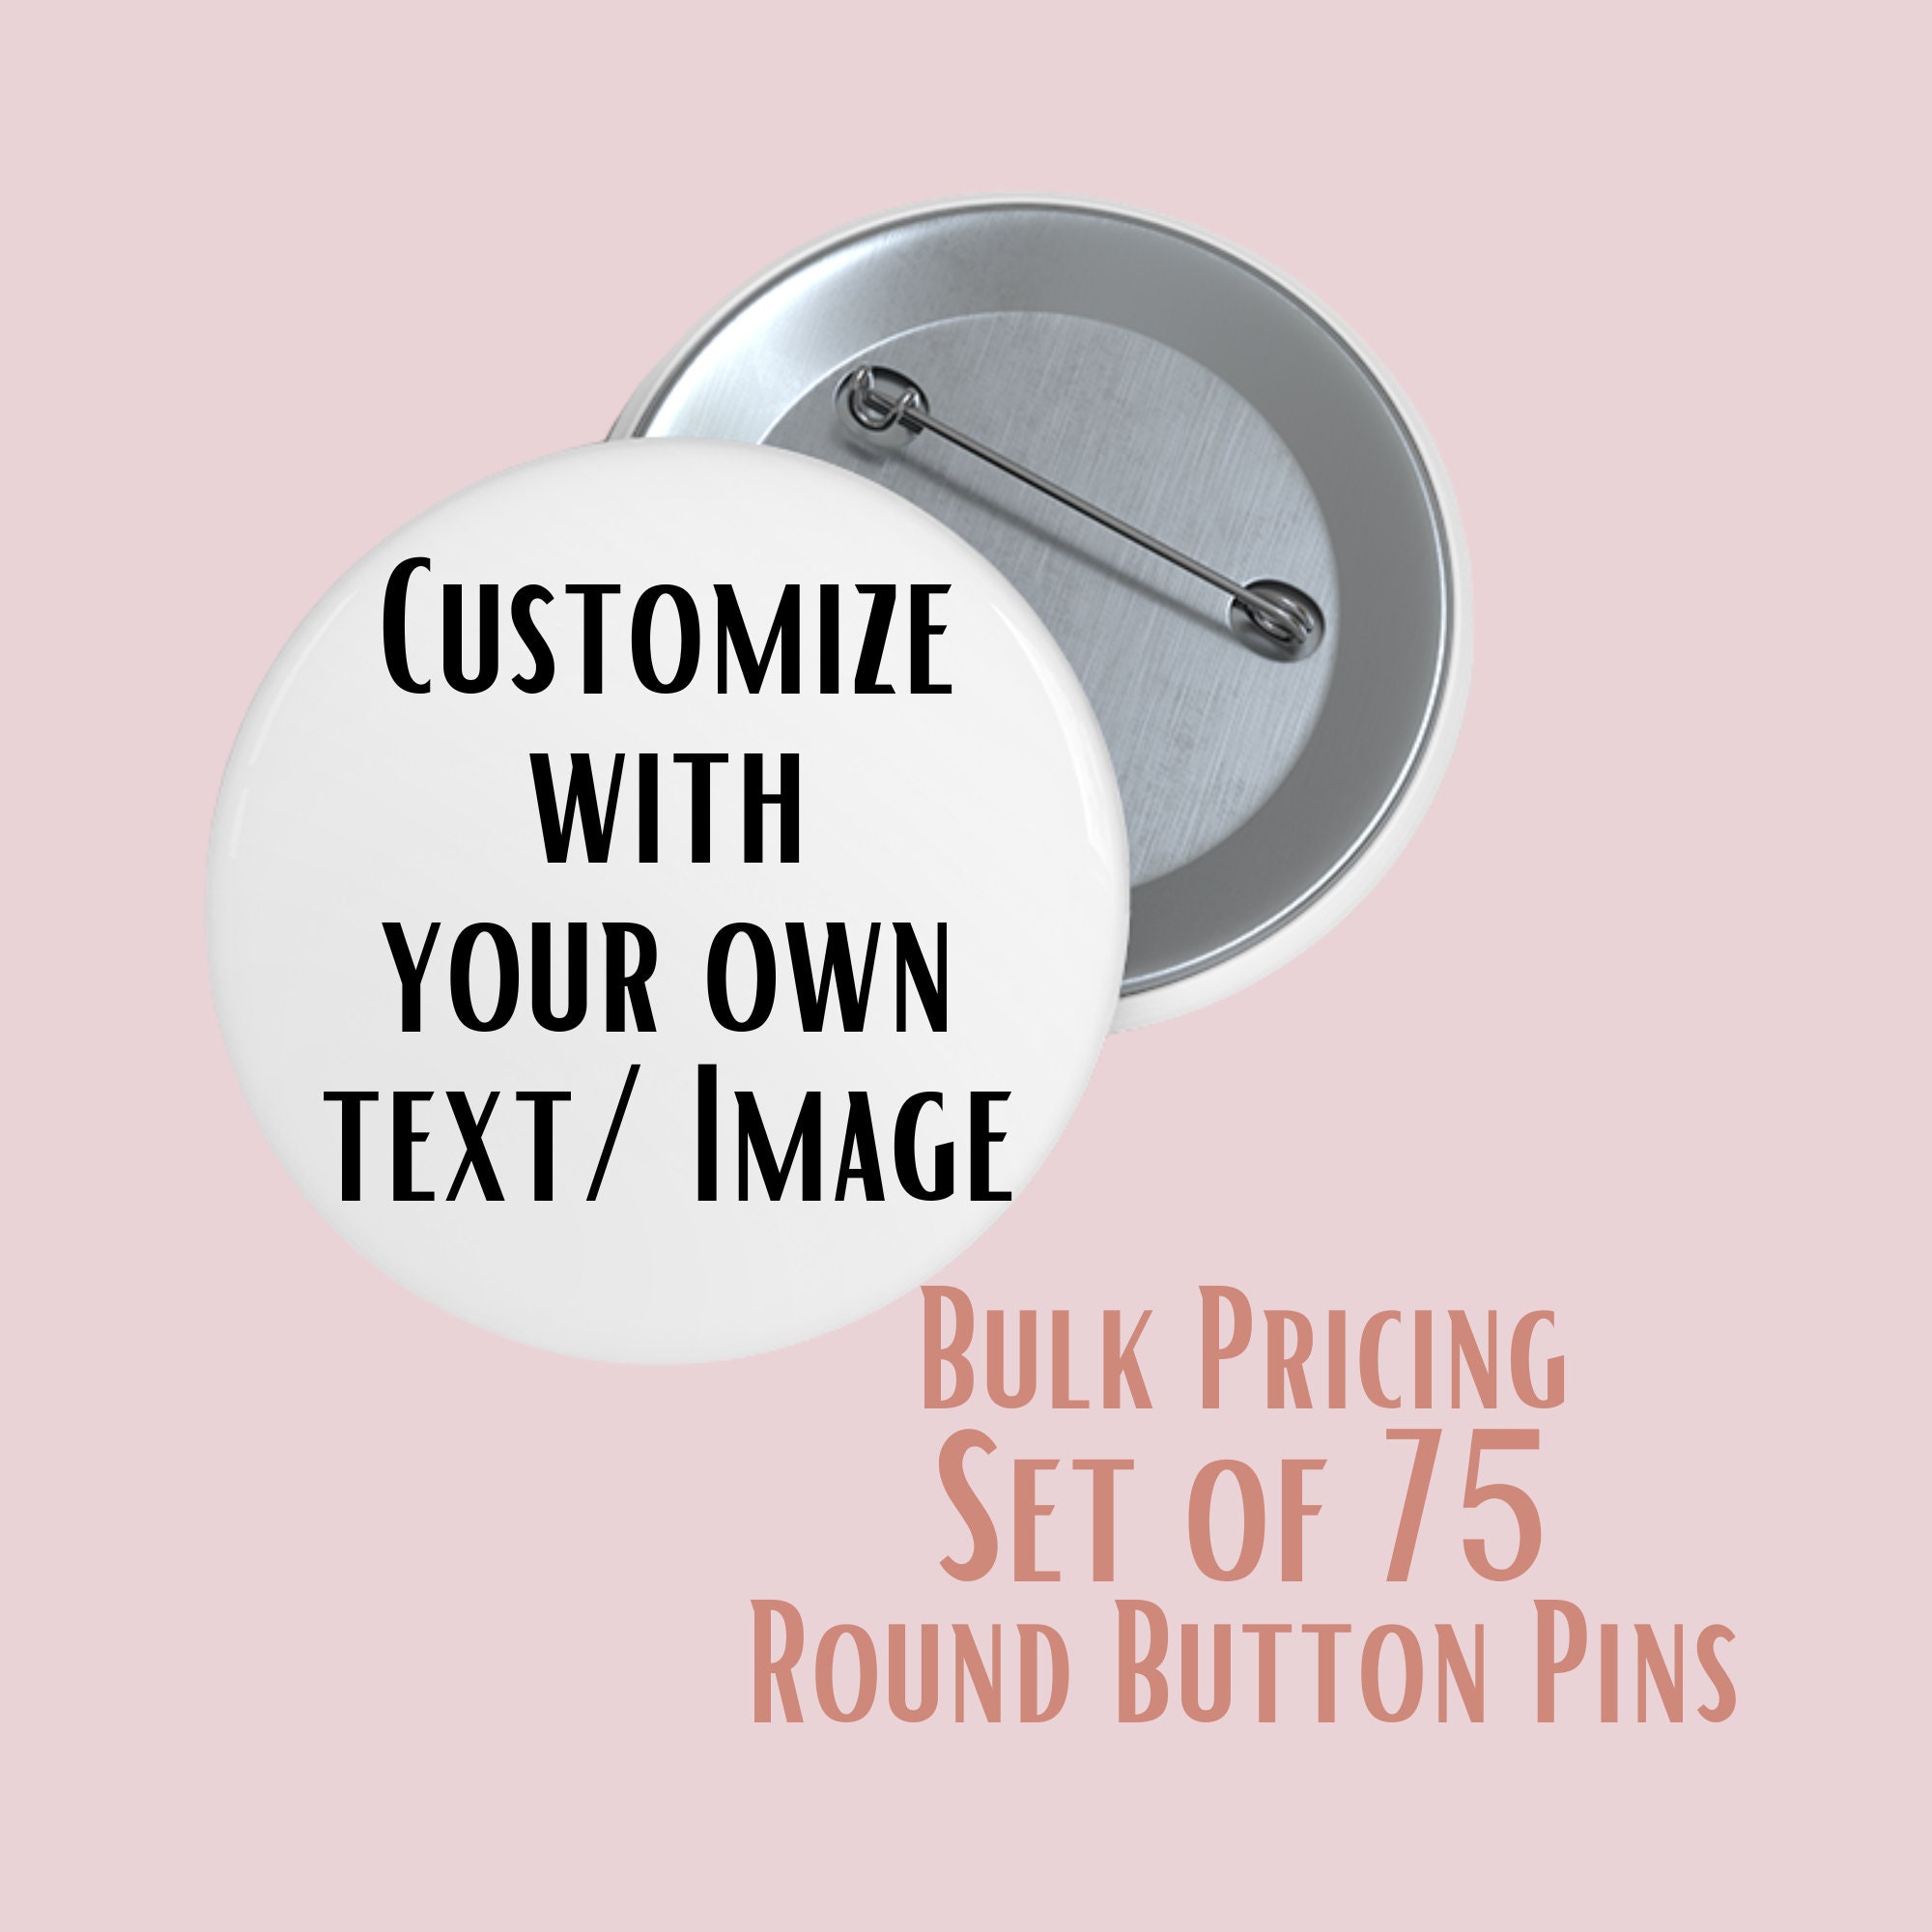 3/4/5/6 Sublimation MDF Badge with Adhesive Pins | Blank Circle Signs Badges | Custom Hardboard Buttons | 5pcs Pack